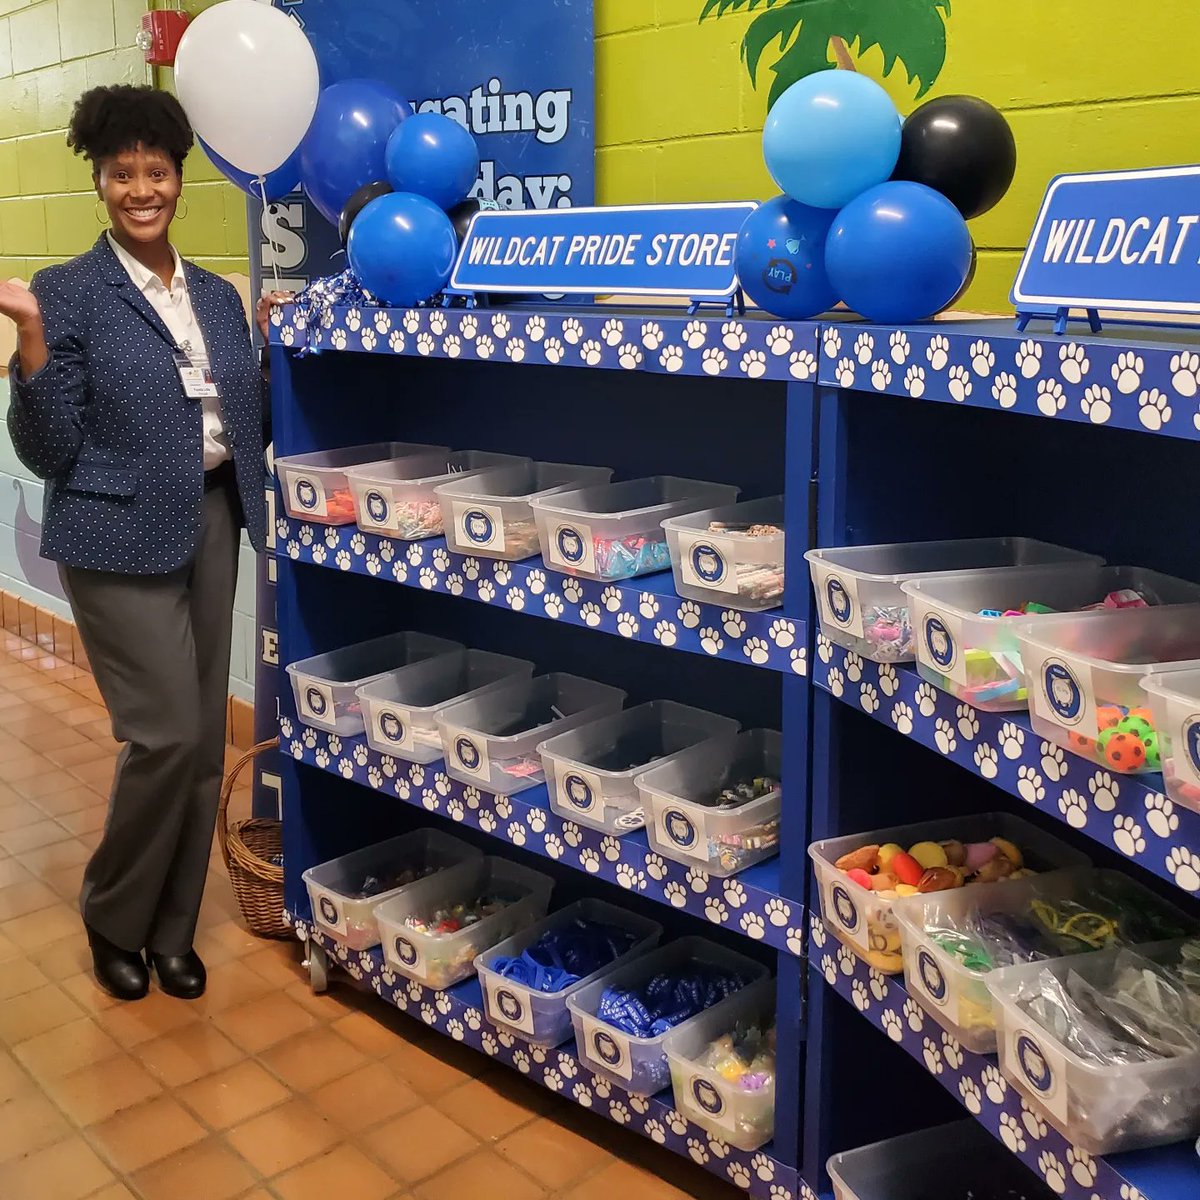 Our Wildcat Pride Store officially opened today. Students earn shopping points for positive behavior. #LevelUp #wildcatpride @ua_wholechild @tcss_schools